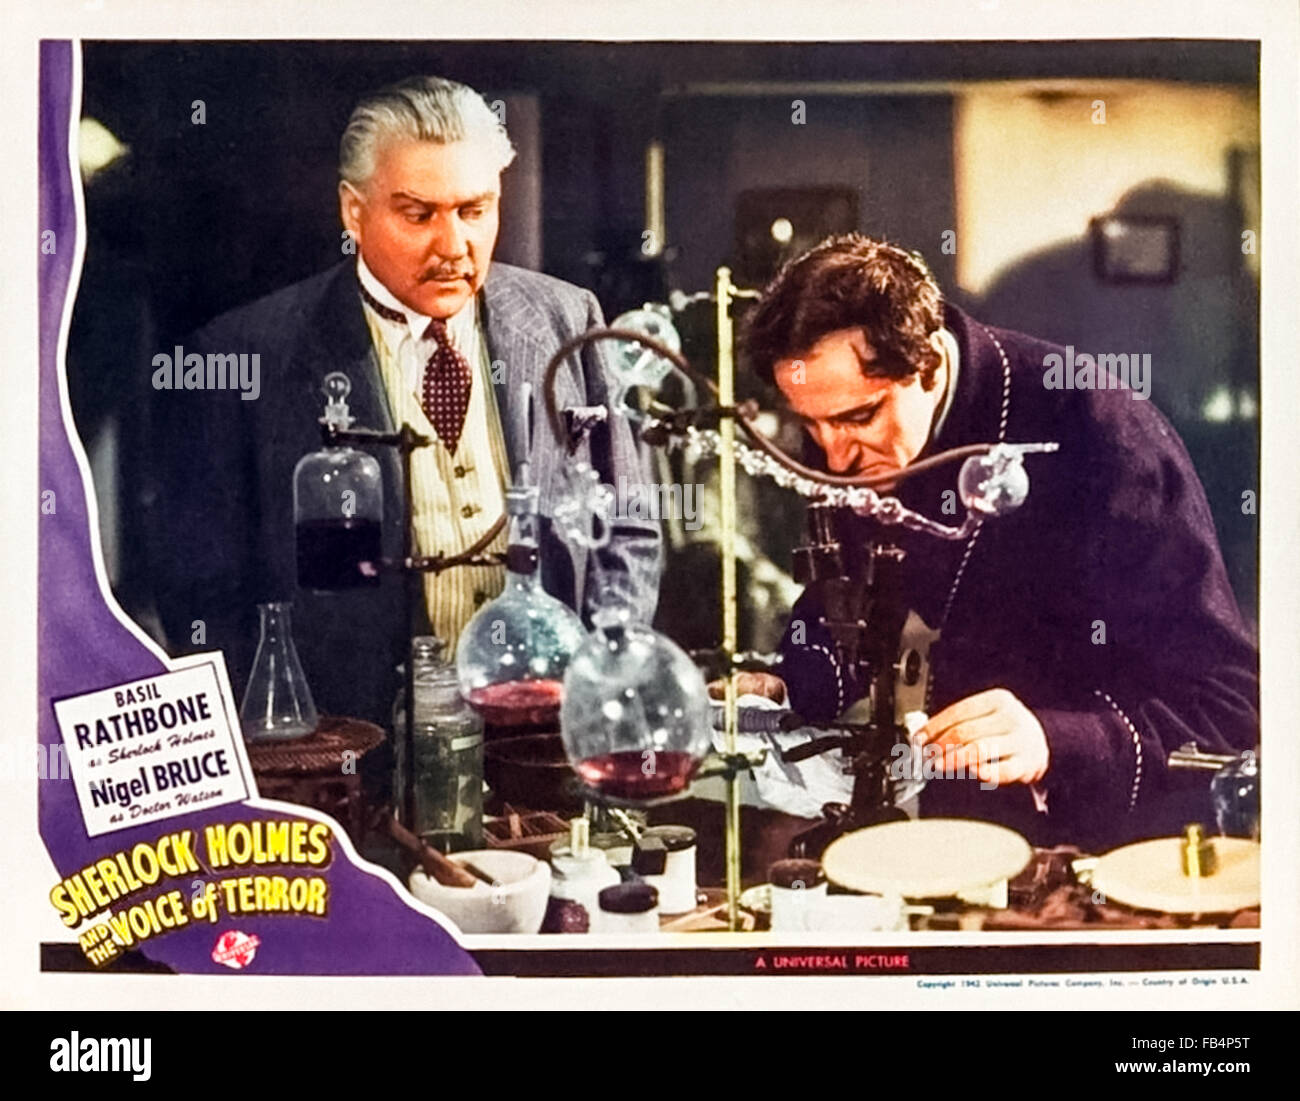 Lobby card for 'Sherlock Holmes and the Voice of Terror' 1942 featuring Sherlock Holmes in his laboratory. Directed by Roy William Neill and starring Basil Rathbone (Holmes); Nigel Bruce (Watson) and Evelyn Ankers (Kitty). See description for more information. Stock Photo